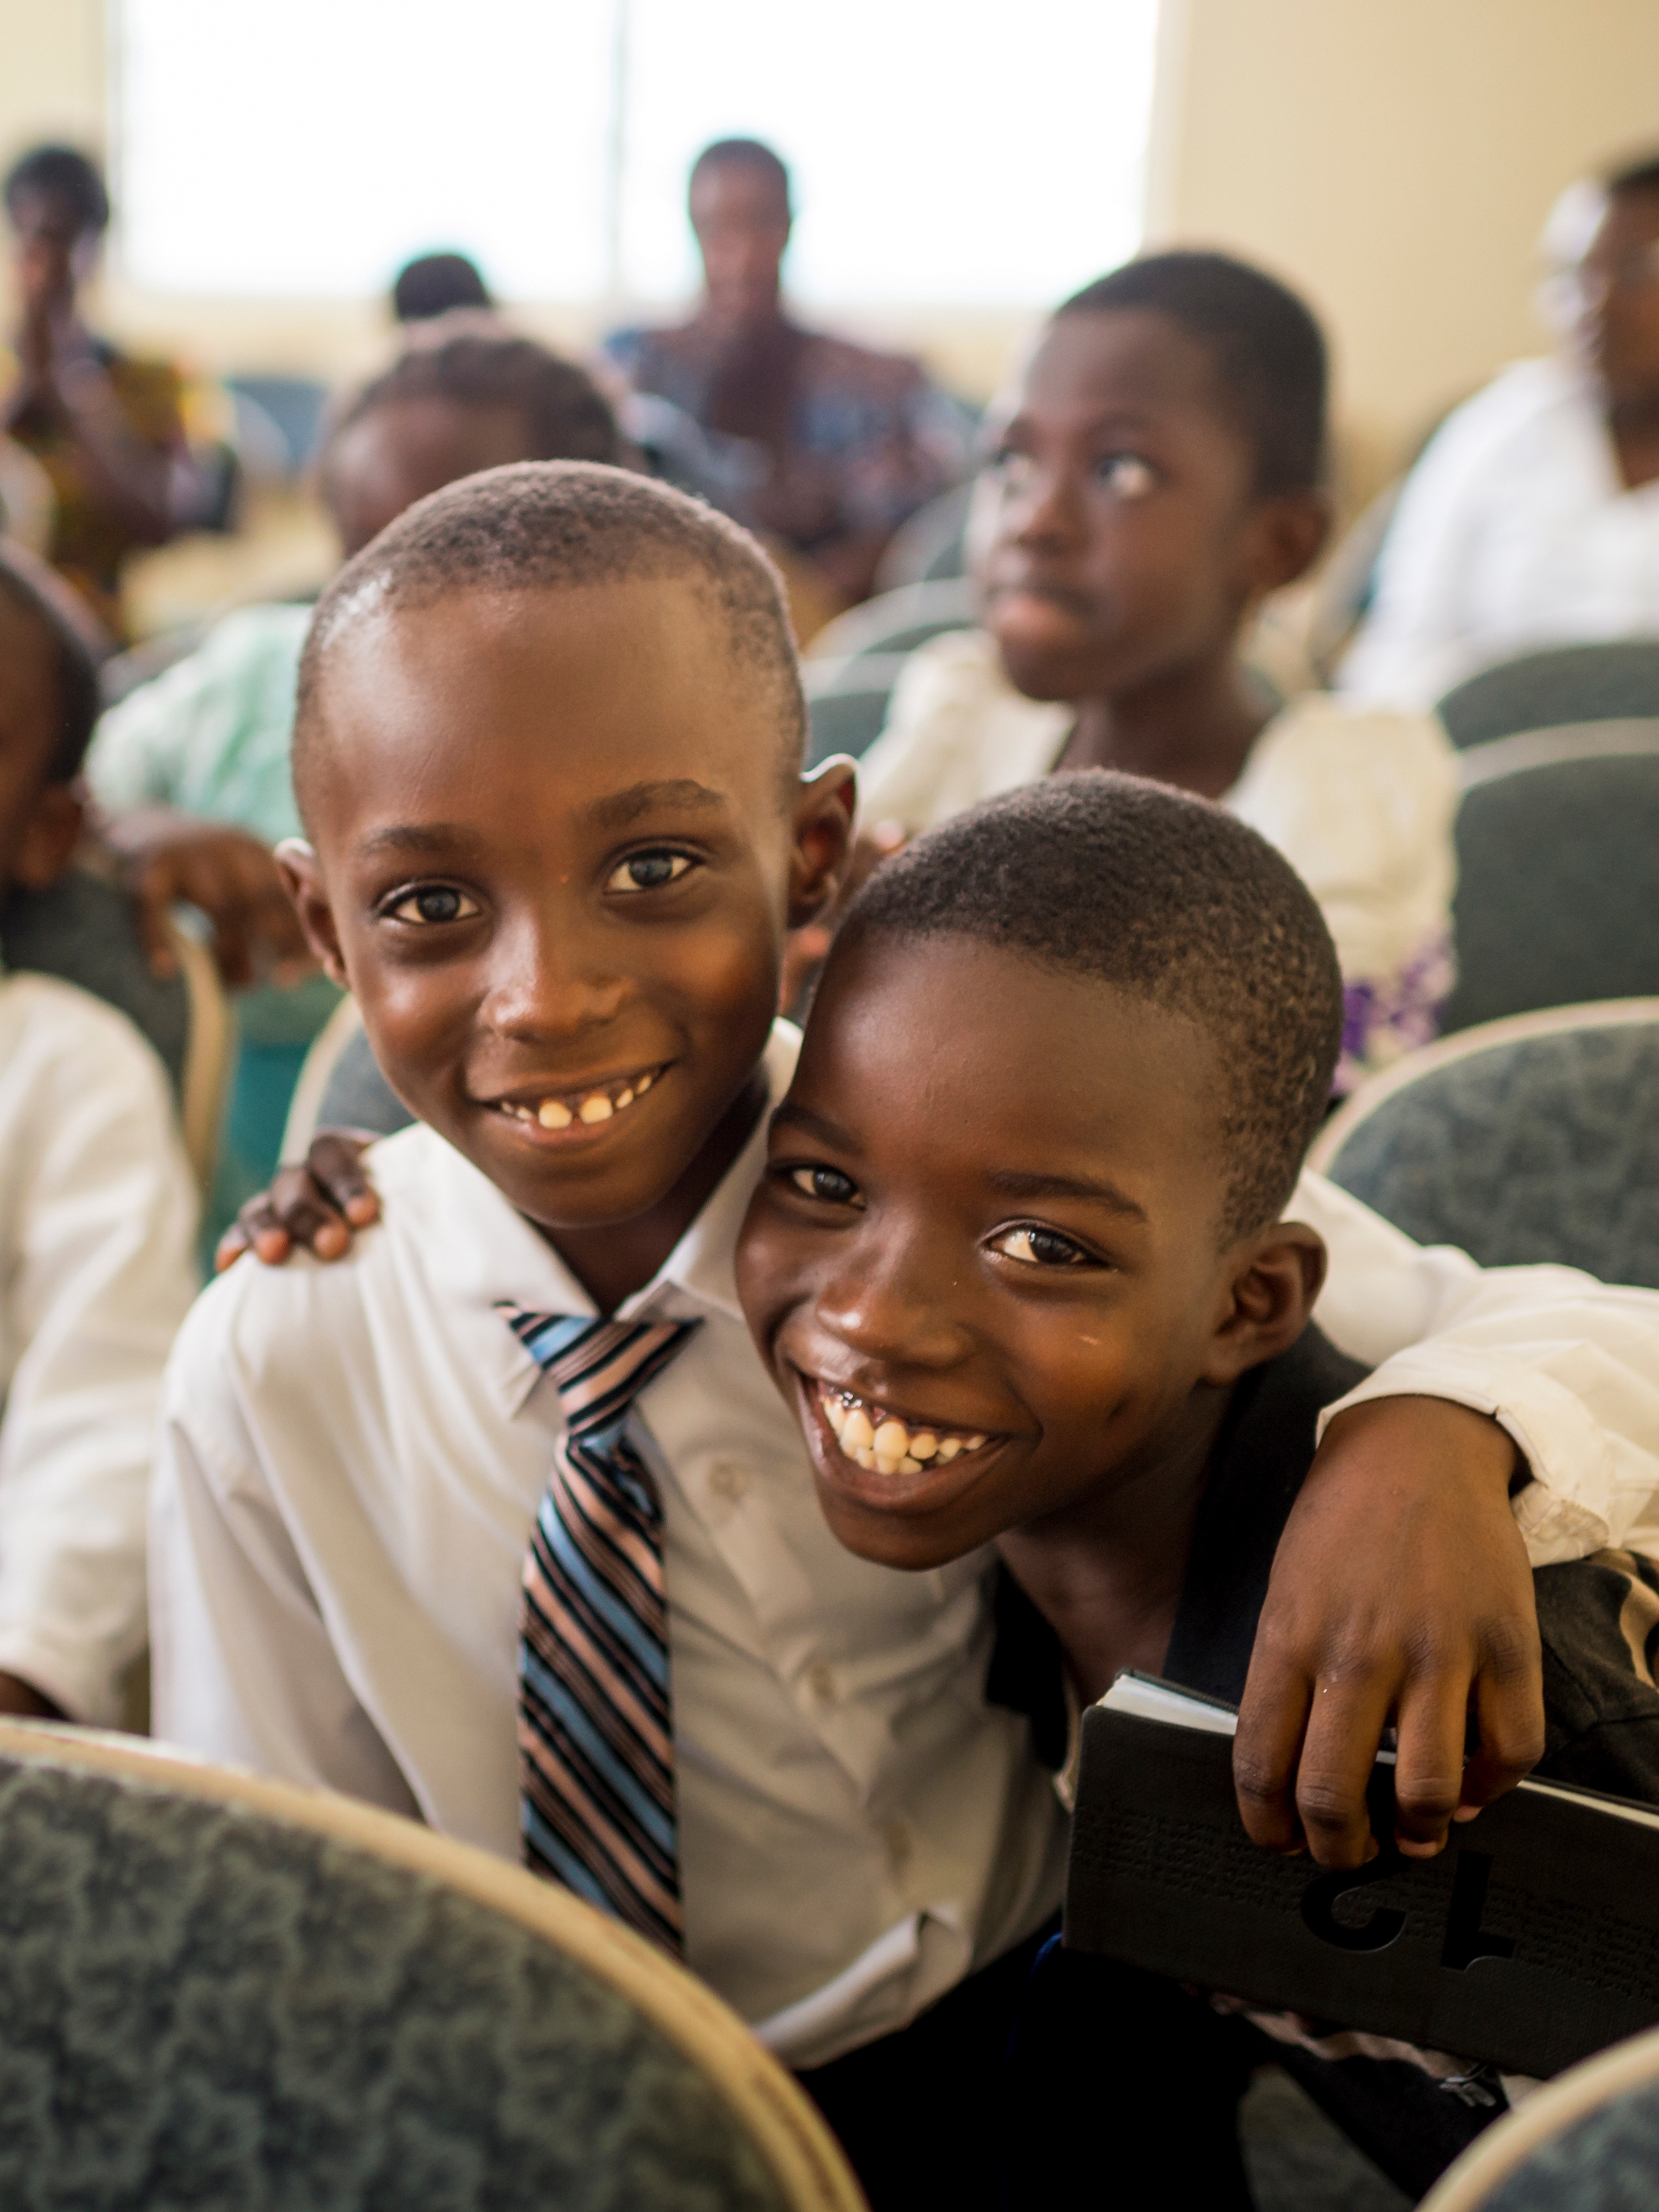 Two Primary-age boys in Ghana, smiling, with their arms wrapped around each other.